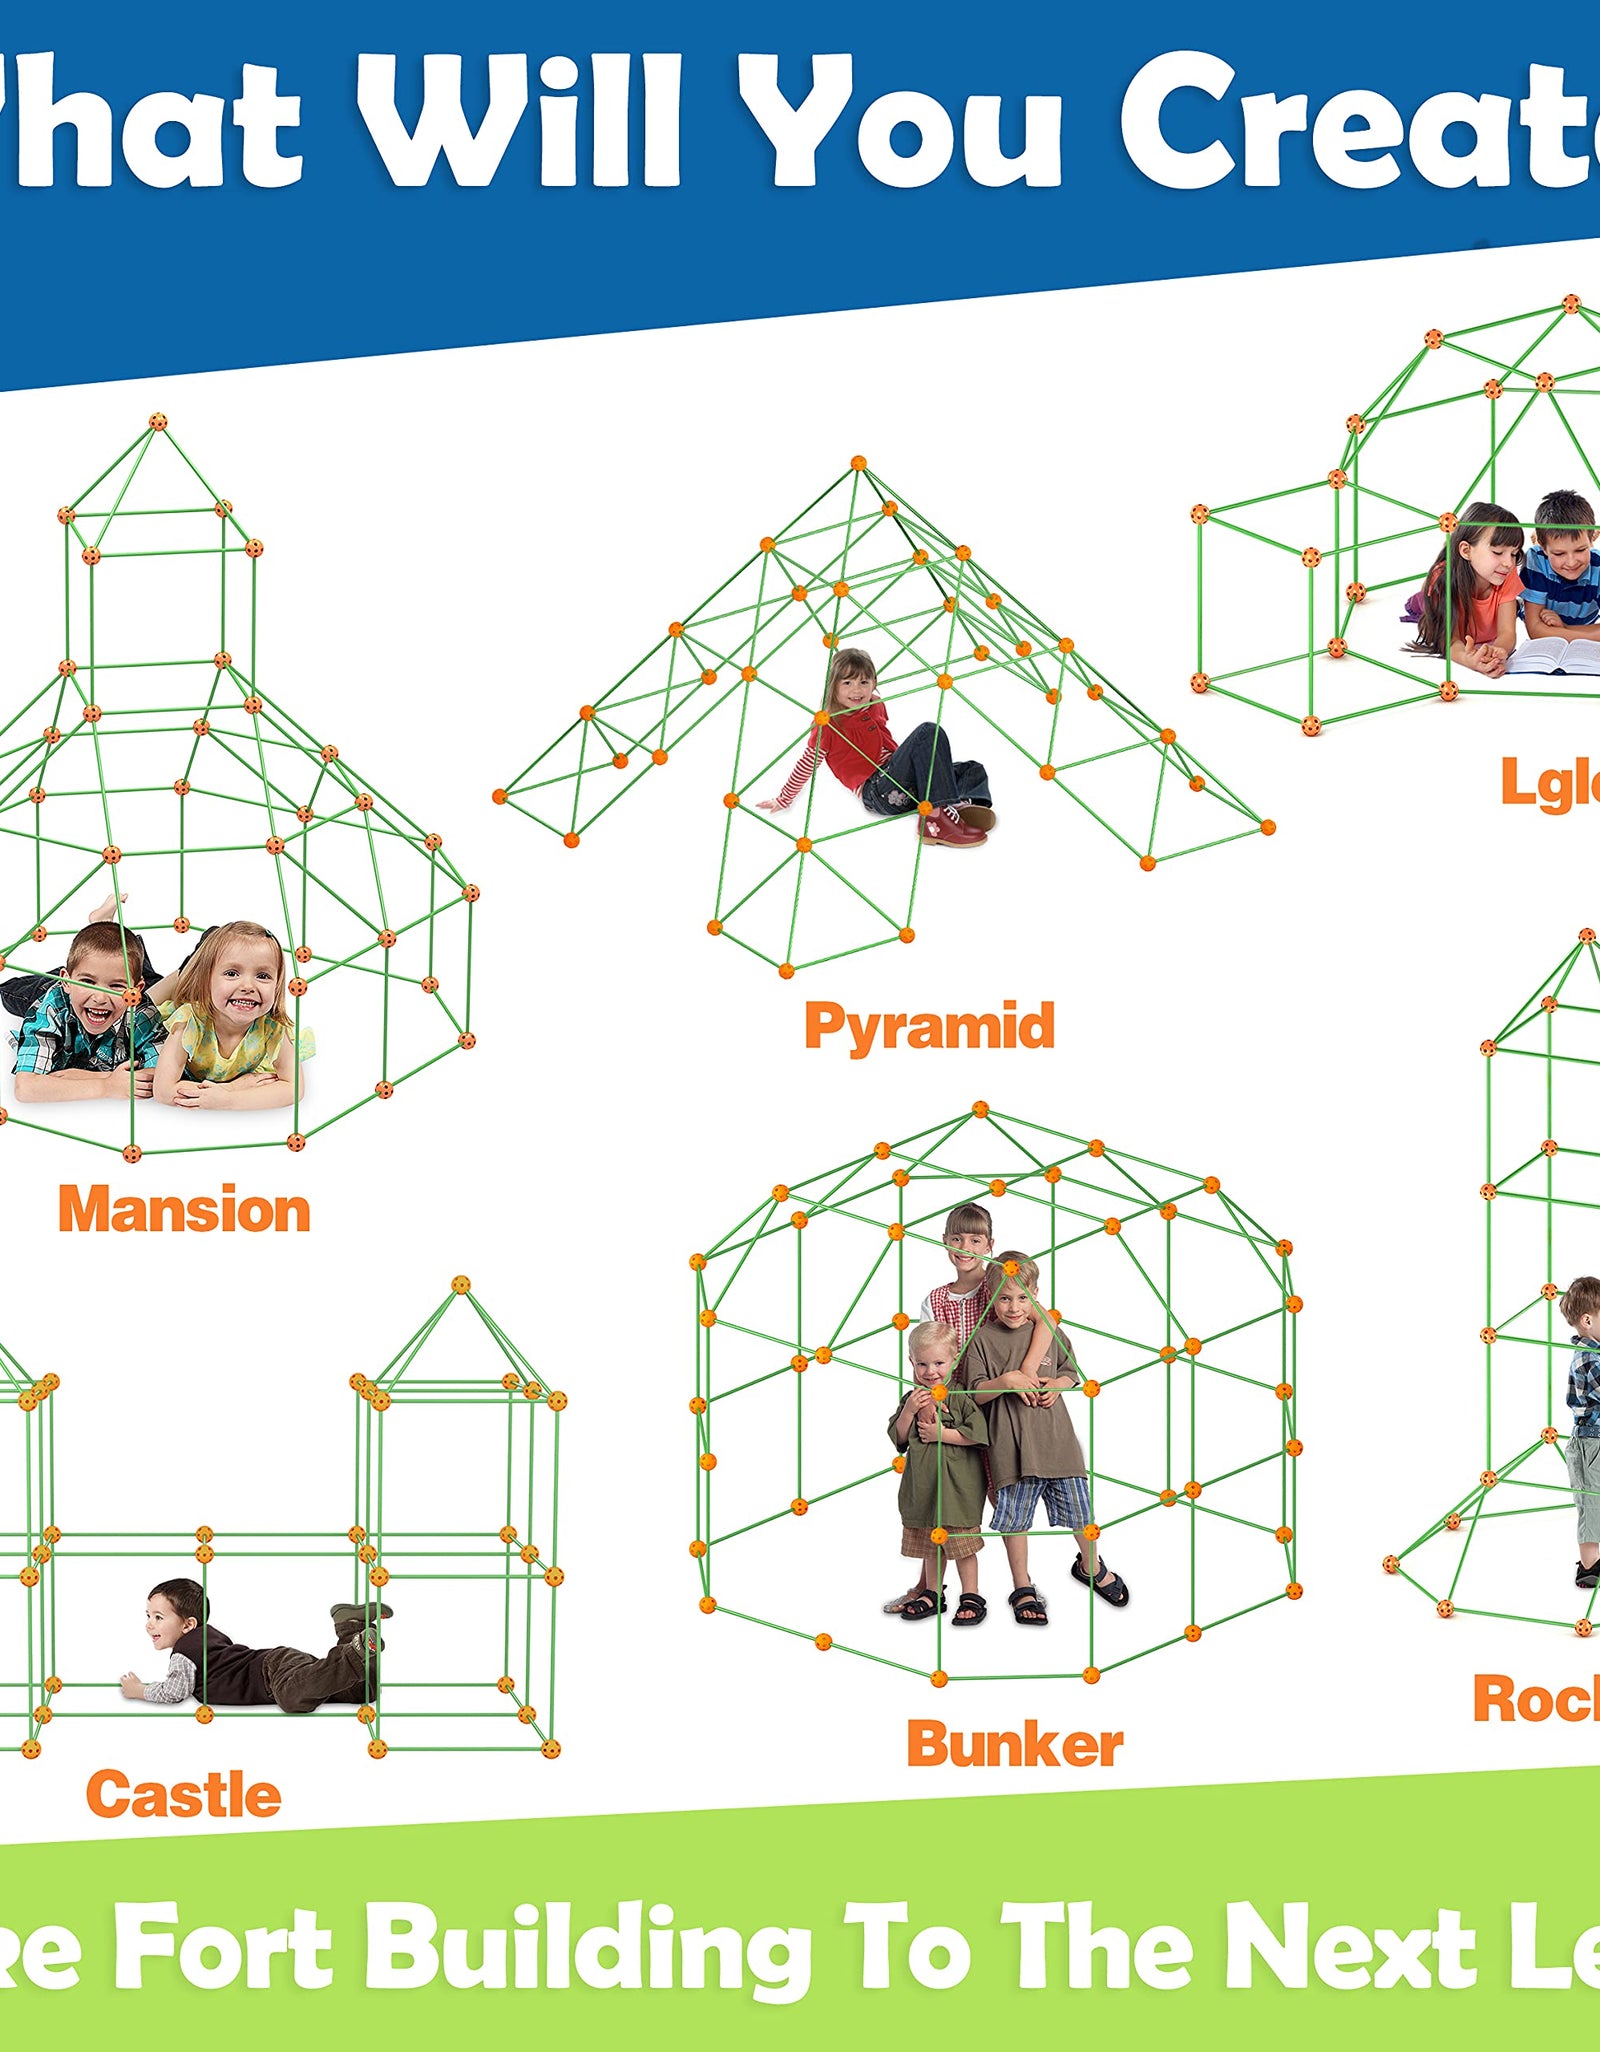 Kids-Fort-Building-Kit-130 Pieces-Creative Fort Toy for 5,6,7 Years Old Boy & Girls- Learning Toys DIY Building Castles Tunnels Play Tent Rocket Tower Indoor & Outdoor